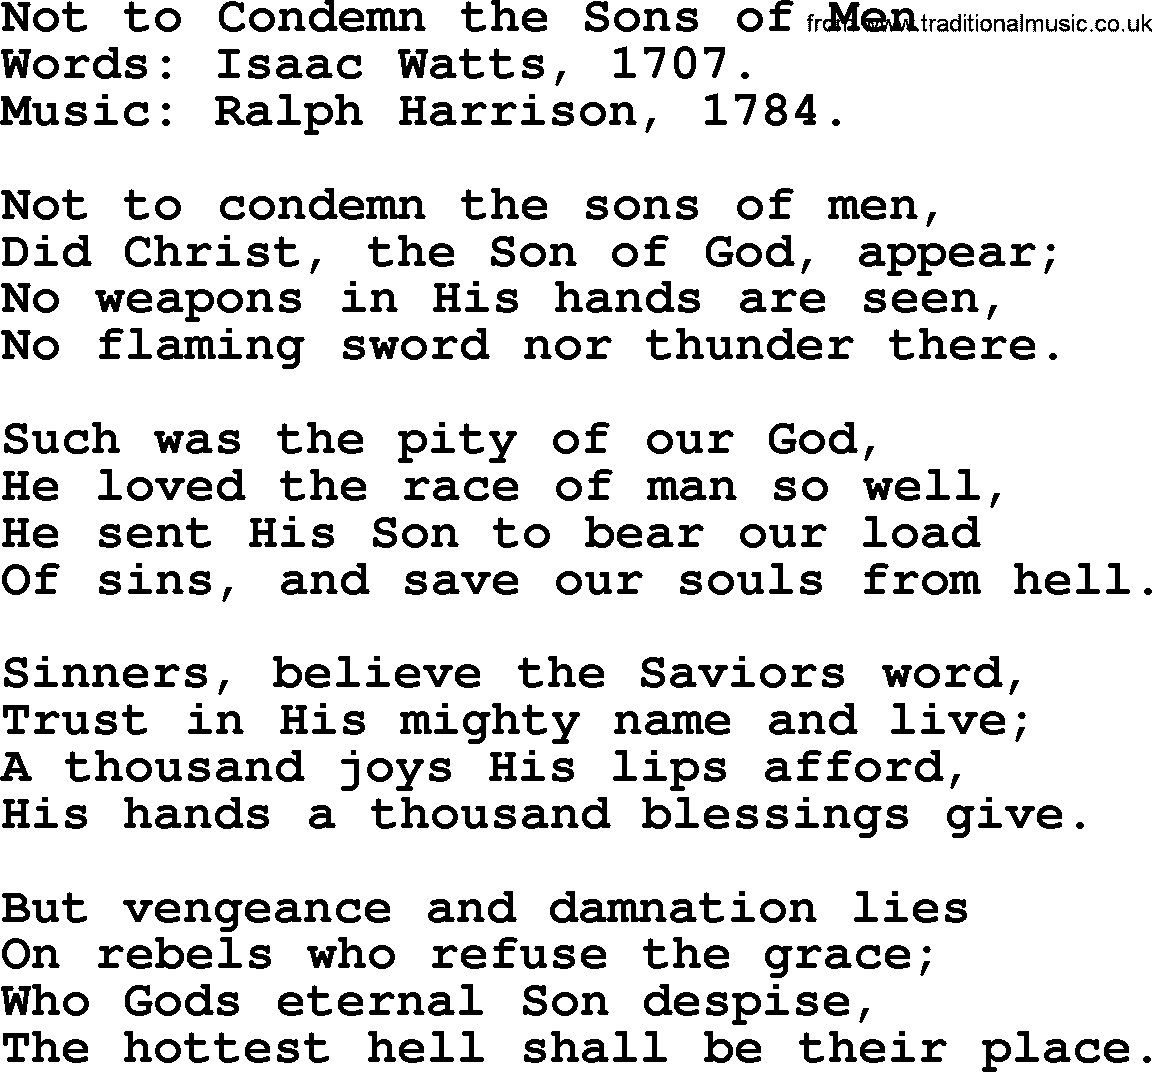 Isaac Watts Christian hymn: Not to Condemn the Sons of Men- lyricss